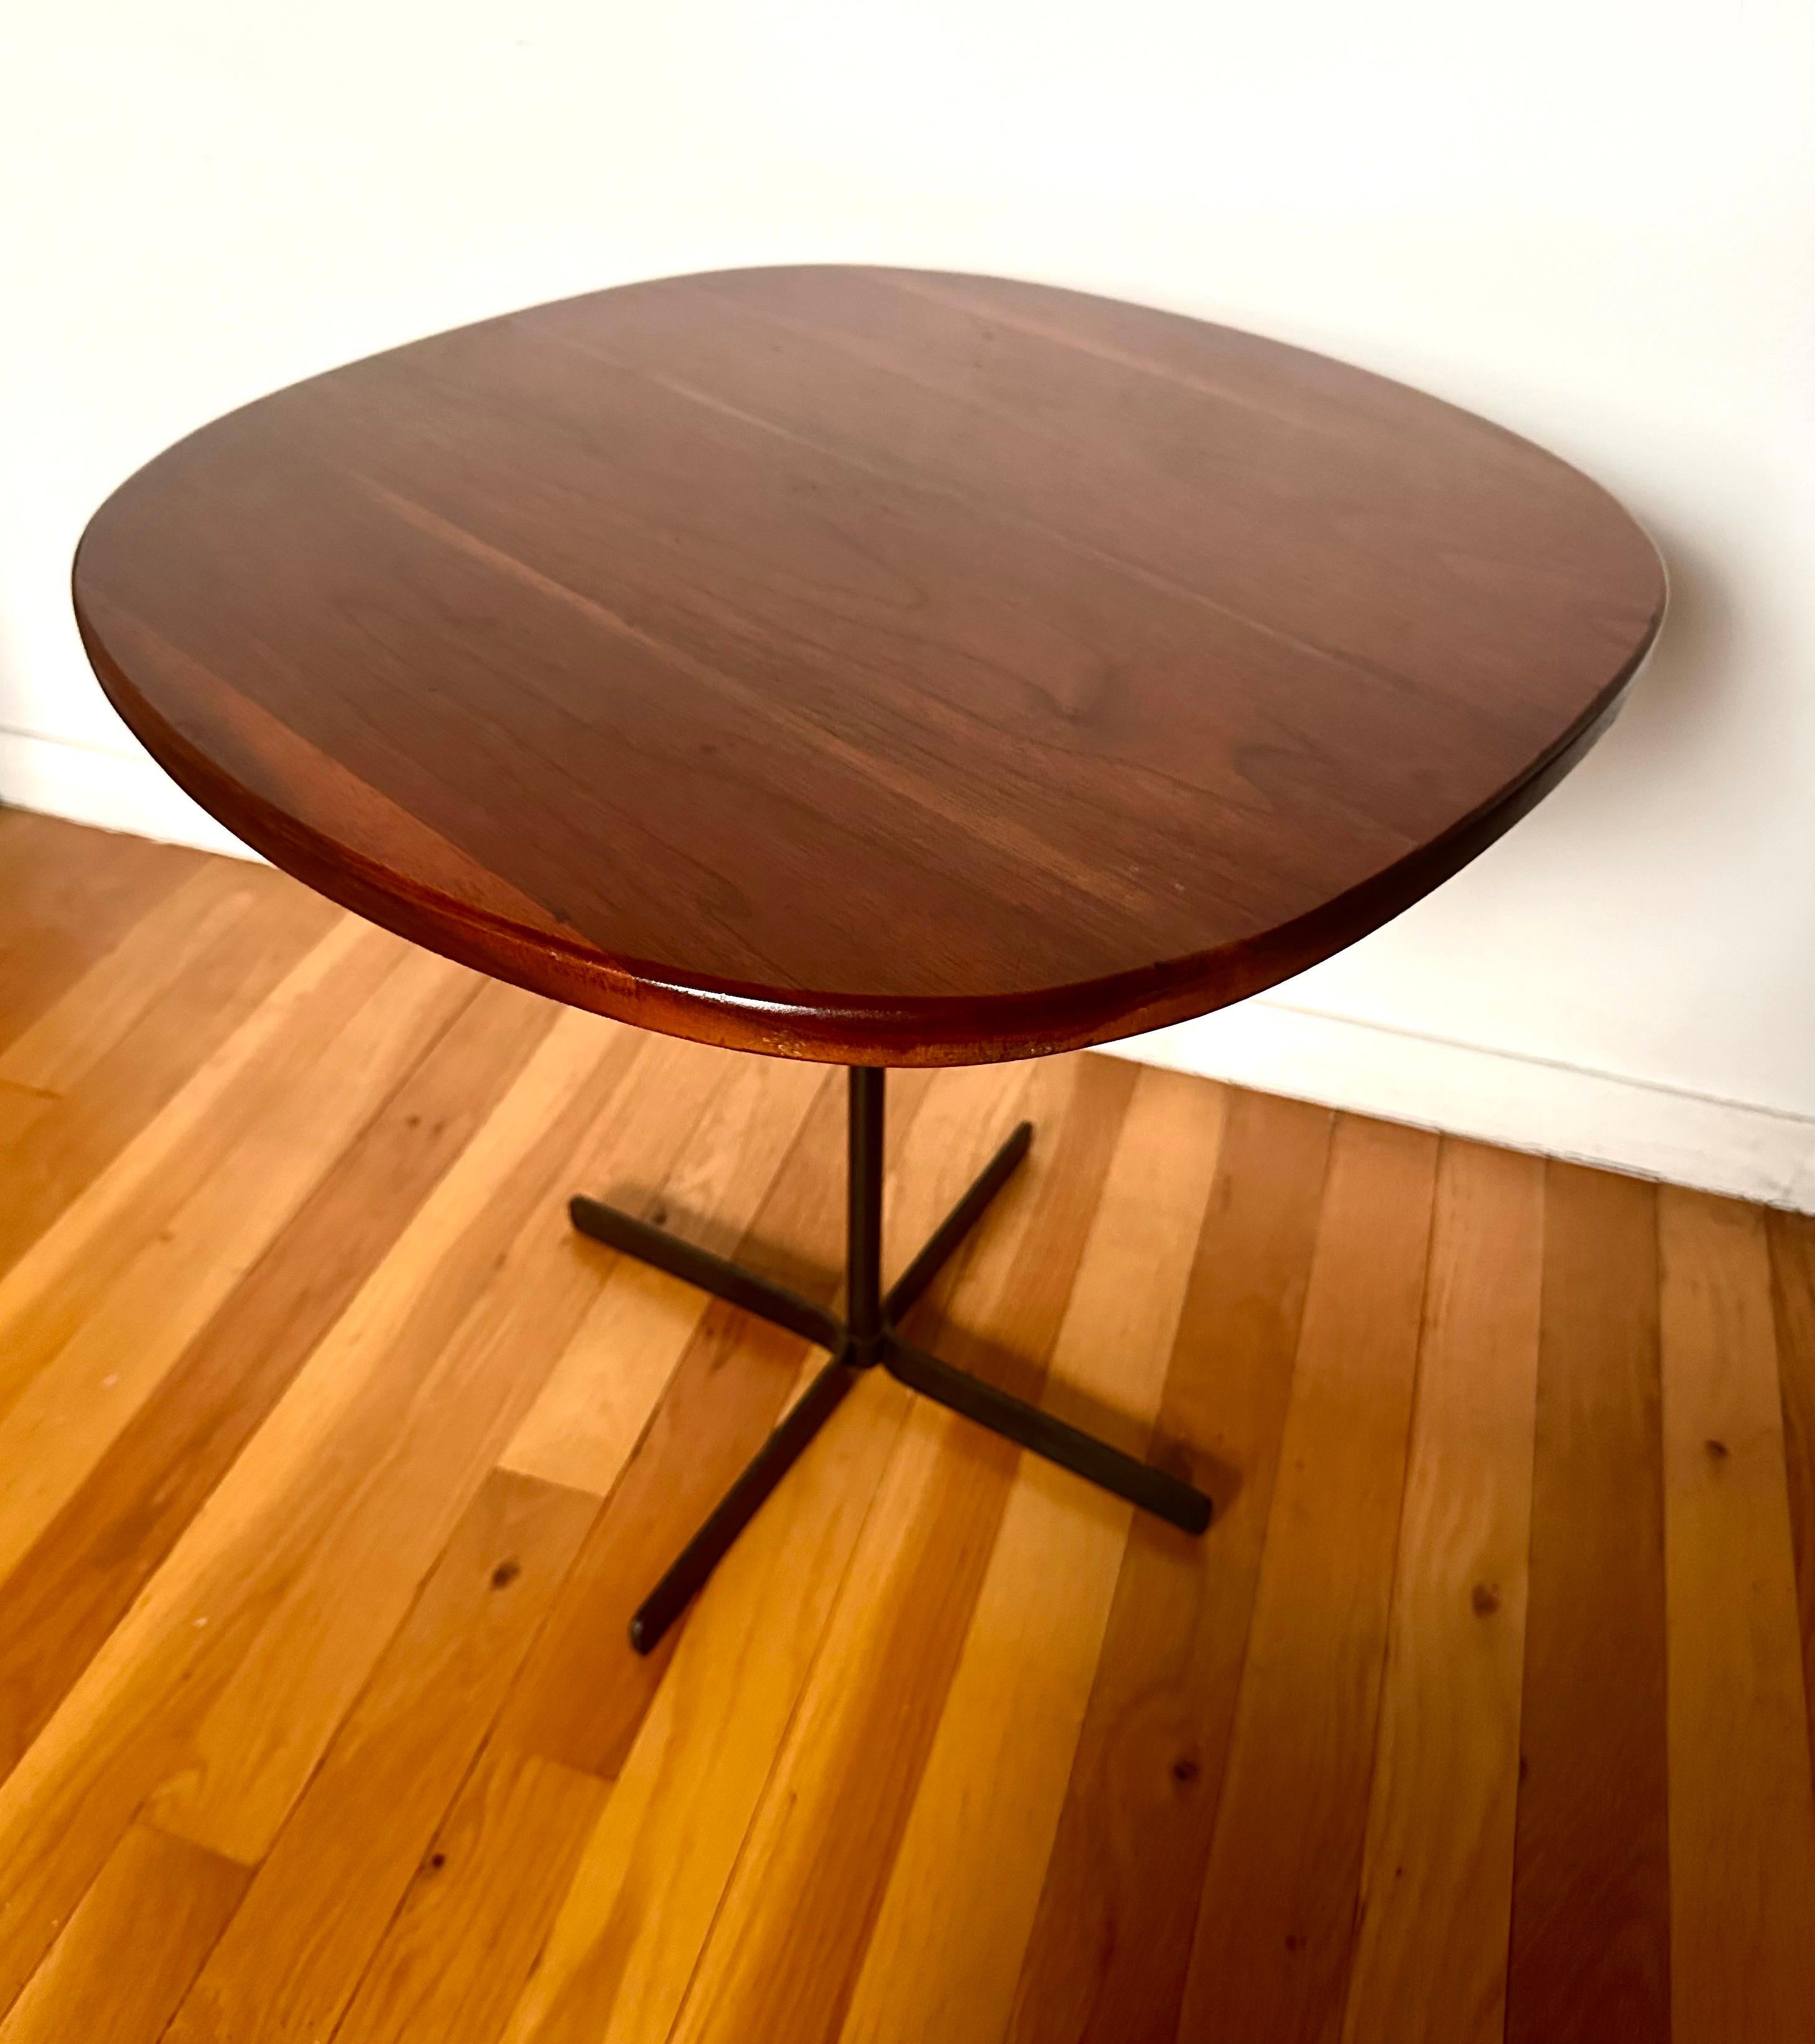 Simple and practical design that effectively conveys the California Craft sensibility through proportion and material.  The rounded square figured-walnut top floats on the slender support over cross base.  Produced for Allan Gould Designs